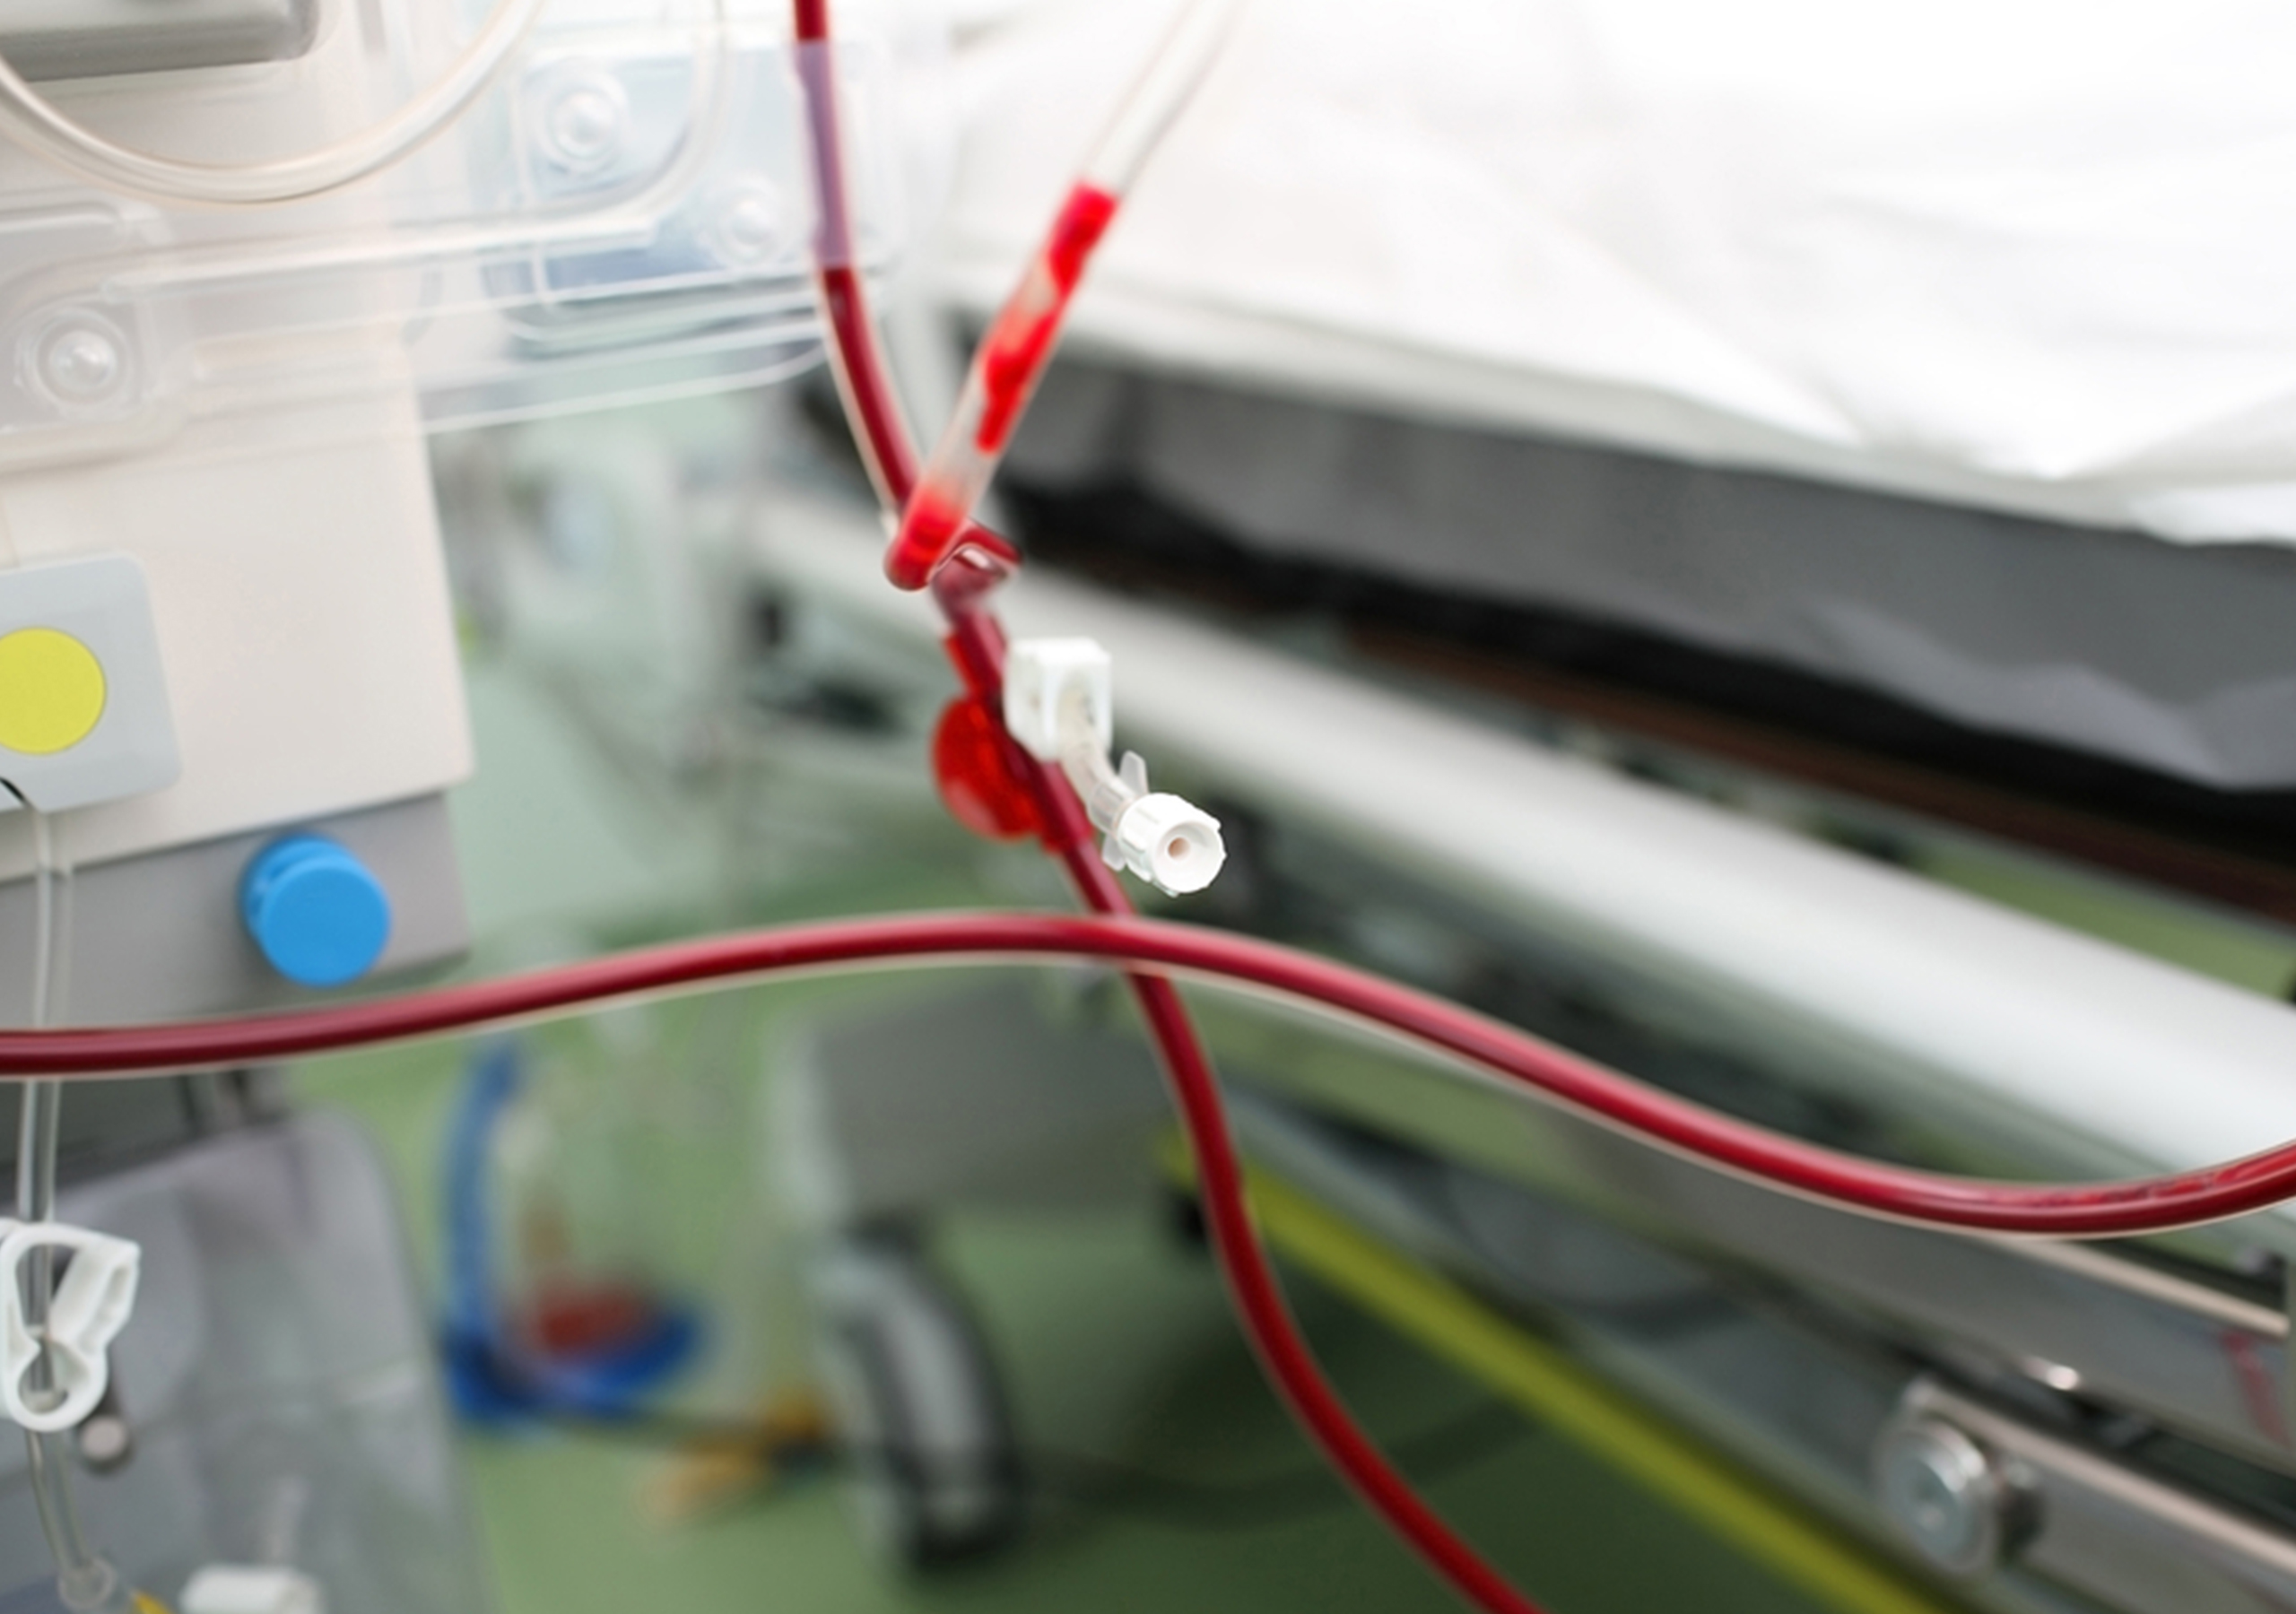 Savings Shown in New Analysis of Intraoperative Autotransfusion